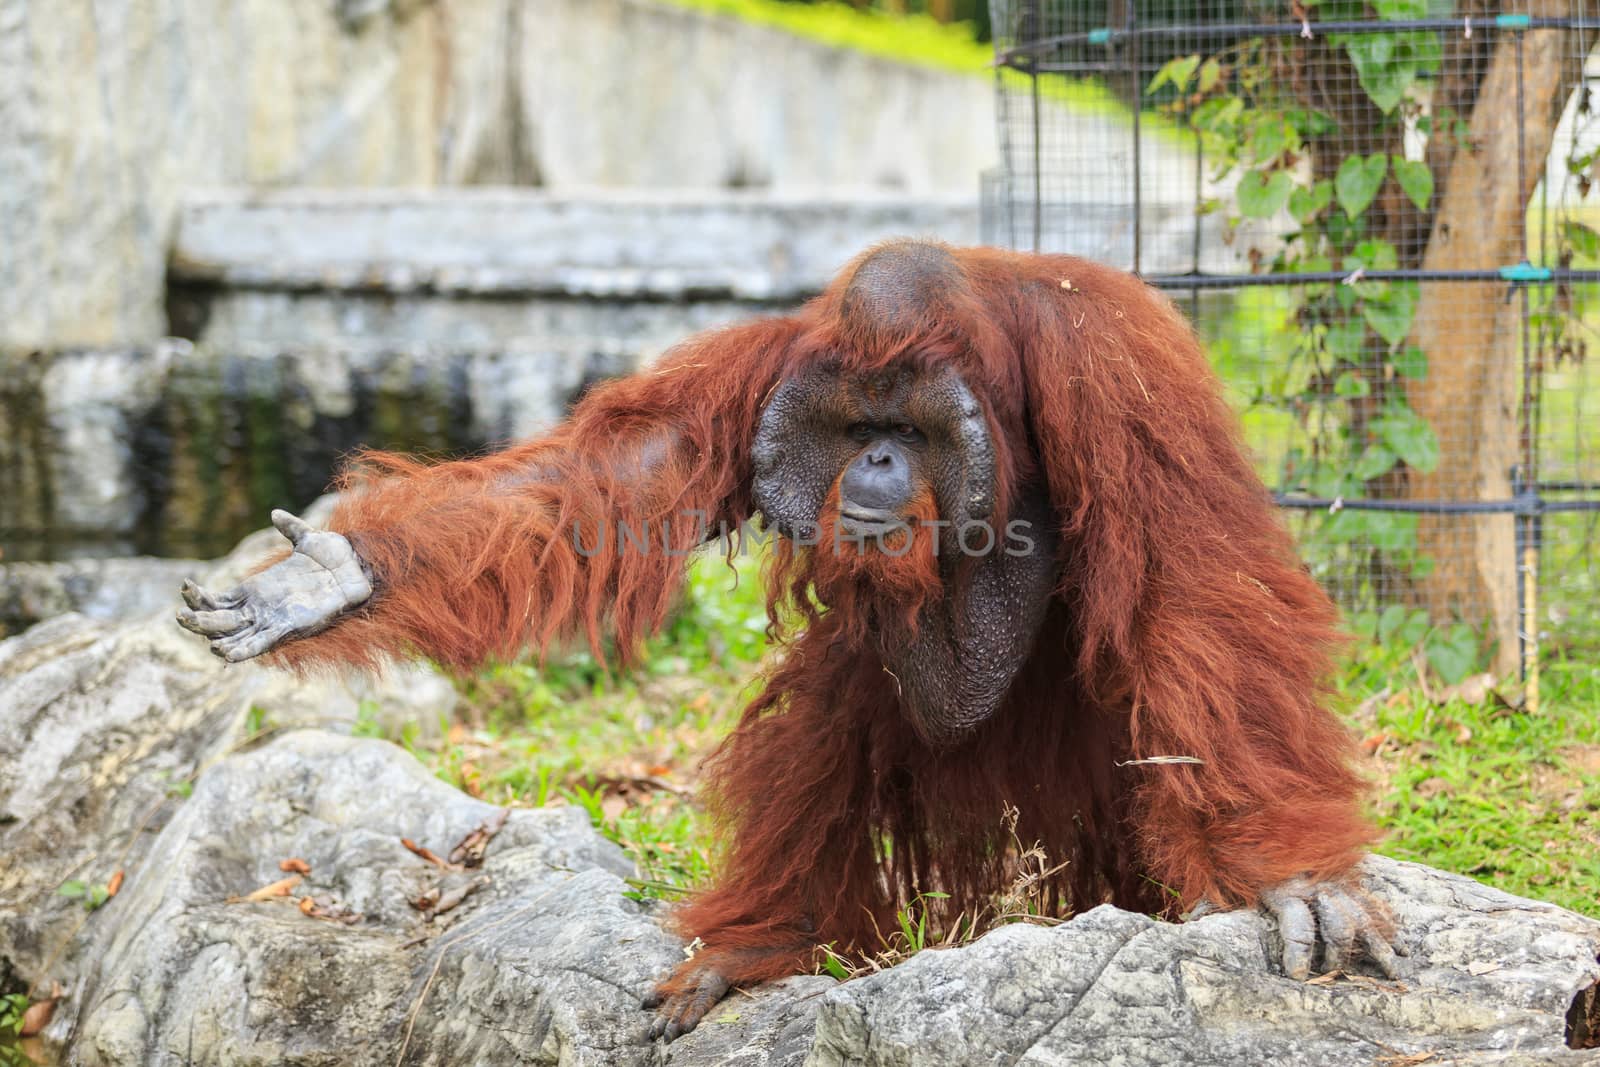 Orangutan in Zoo by papound